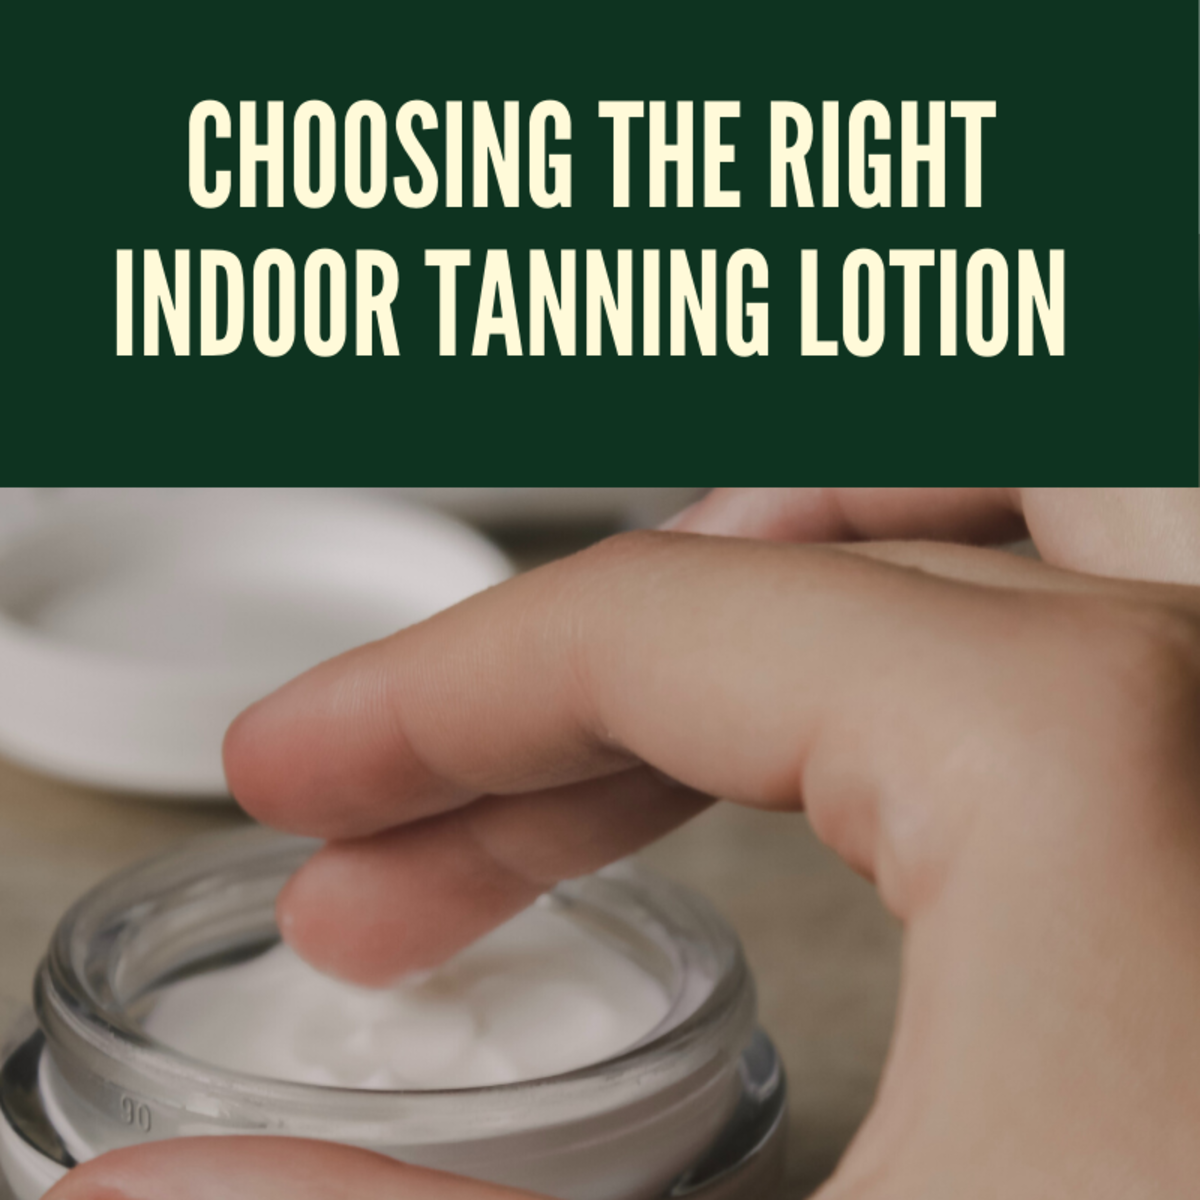 Indoor Tanning Lotion: Choose the Right One for You